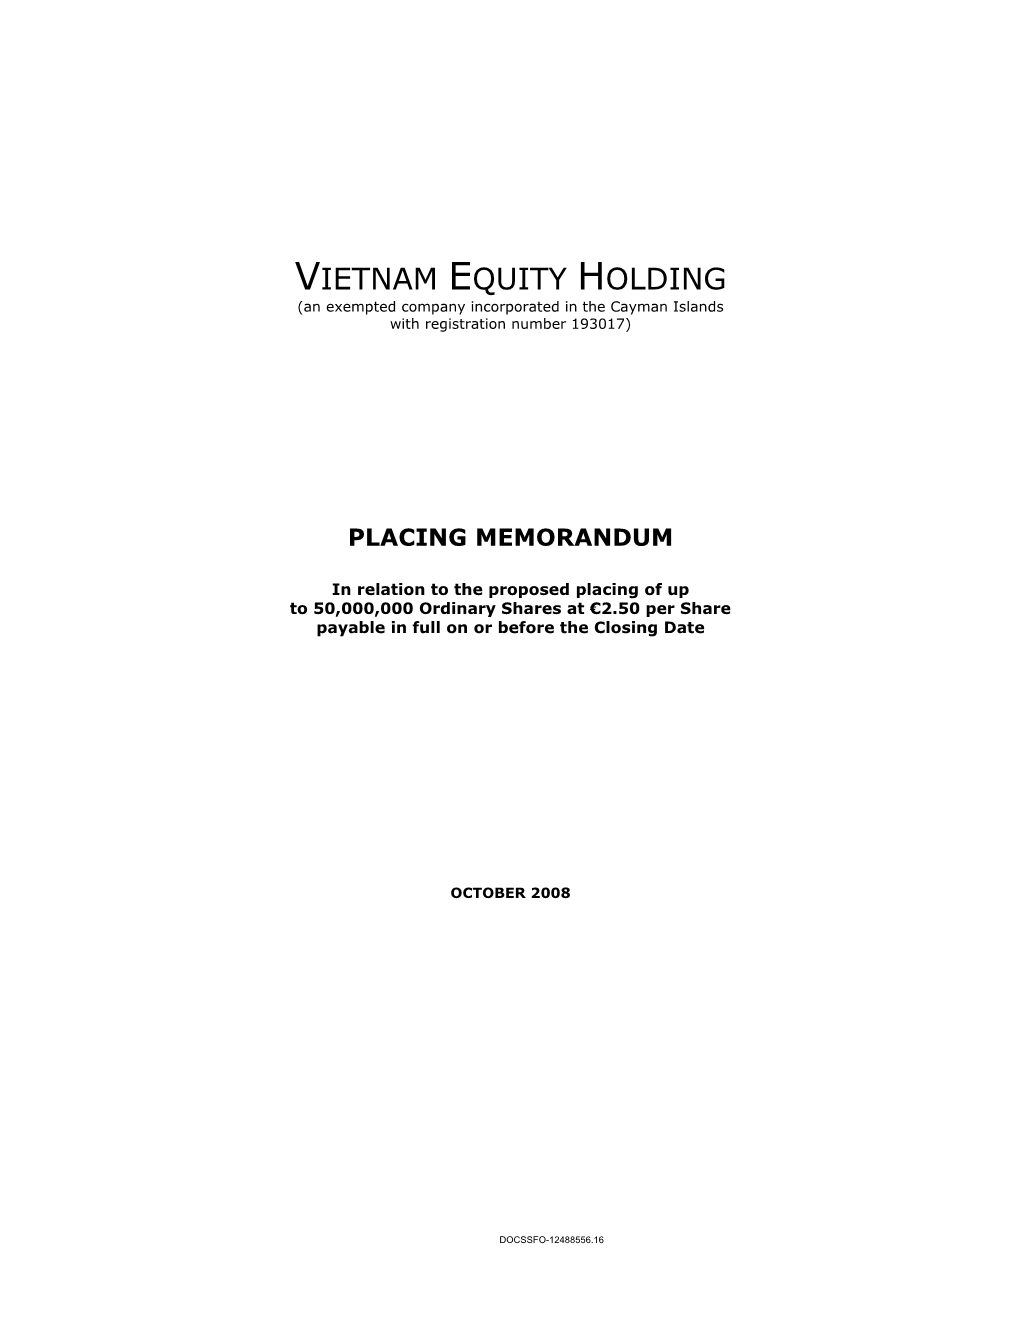 VIETNAM EQUITY HOLDING (An Exempted Company Incorporated in the Cayman Islands with Registration Number 193017)